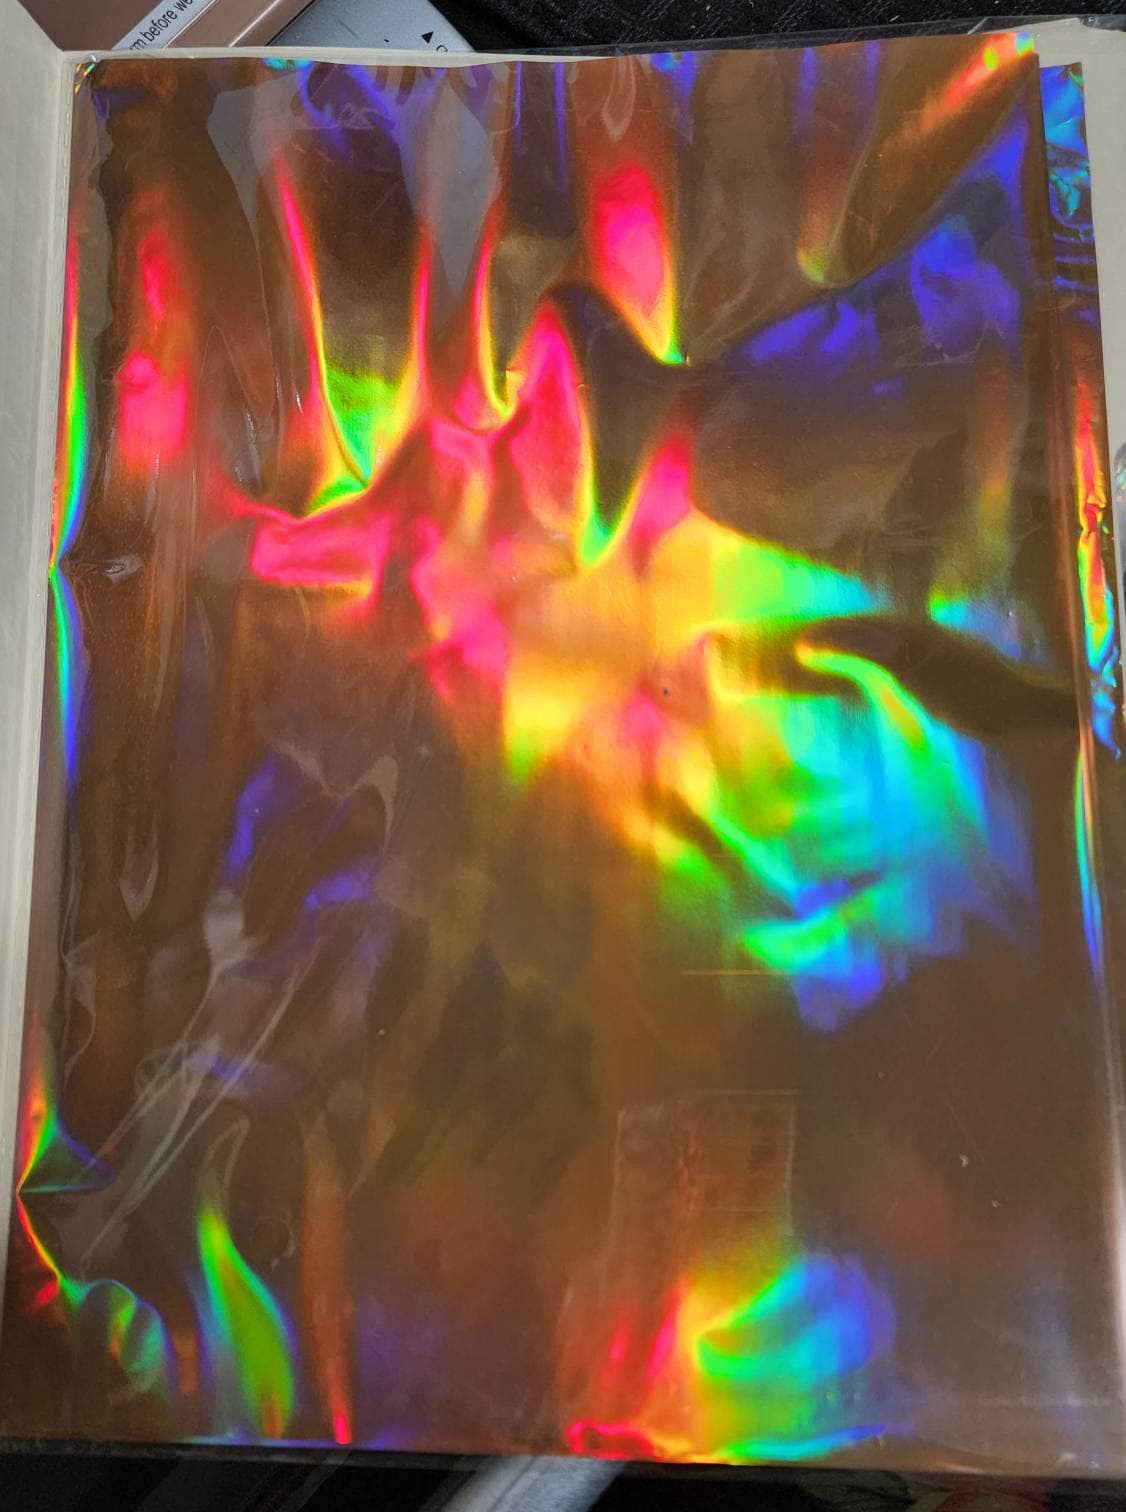 Black Holographic Foil Transfer Sheets by Recollections™, 5.5 x 5.5